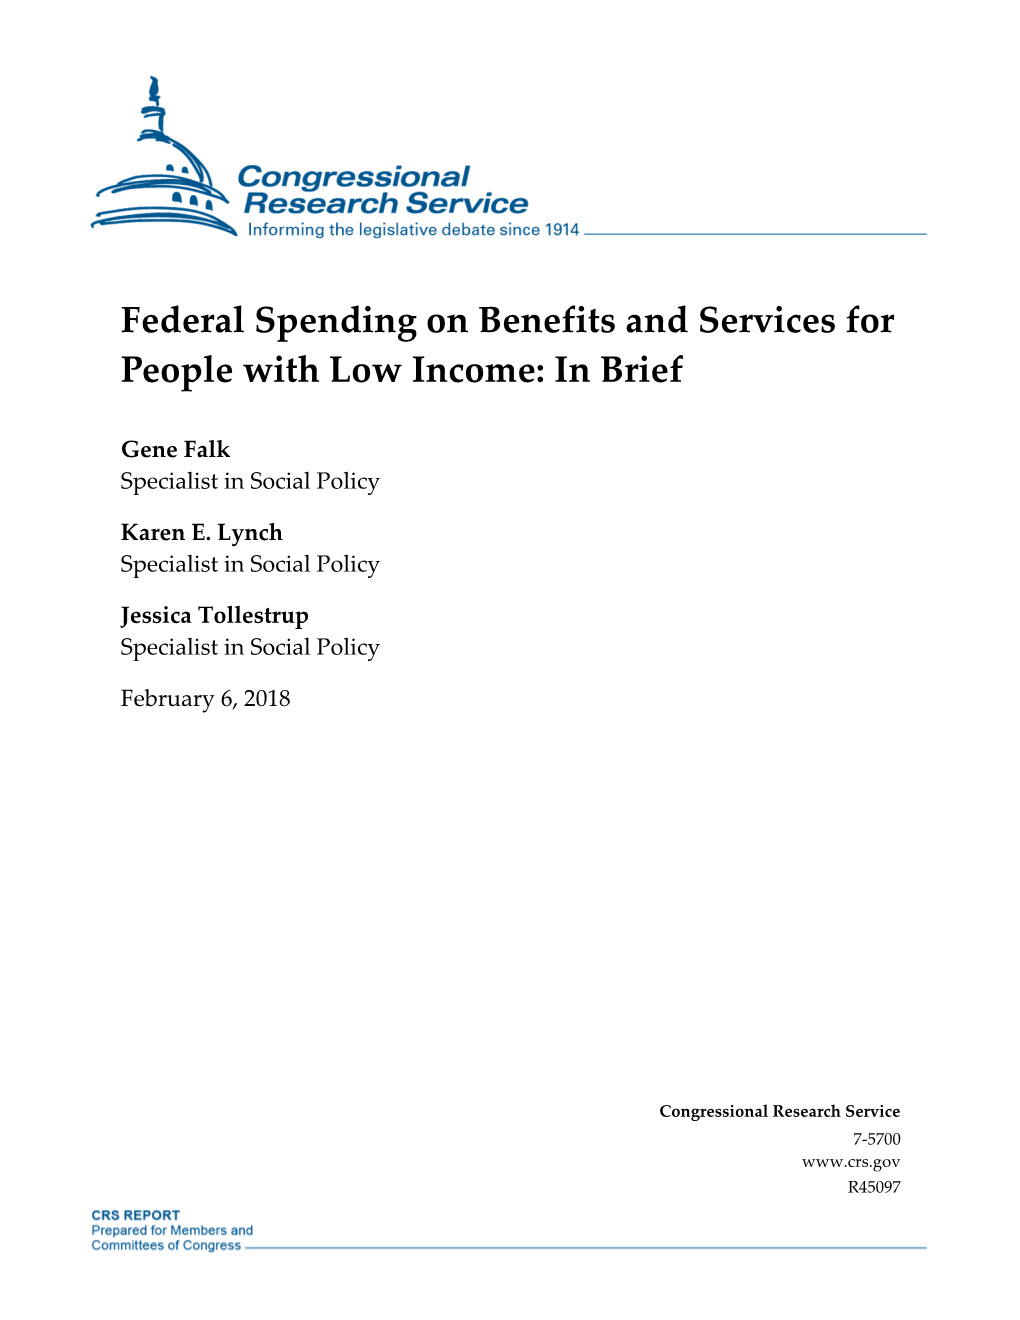 Federal Spending on Benefits and Services for People with Low Income: in Brief